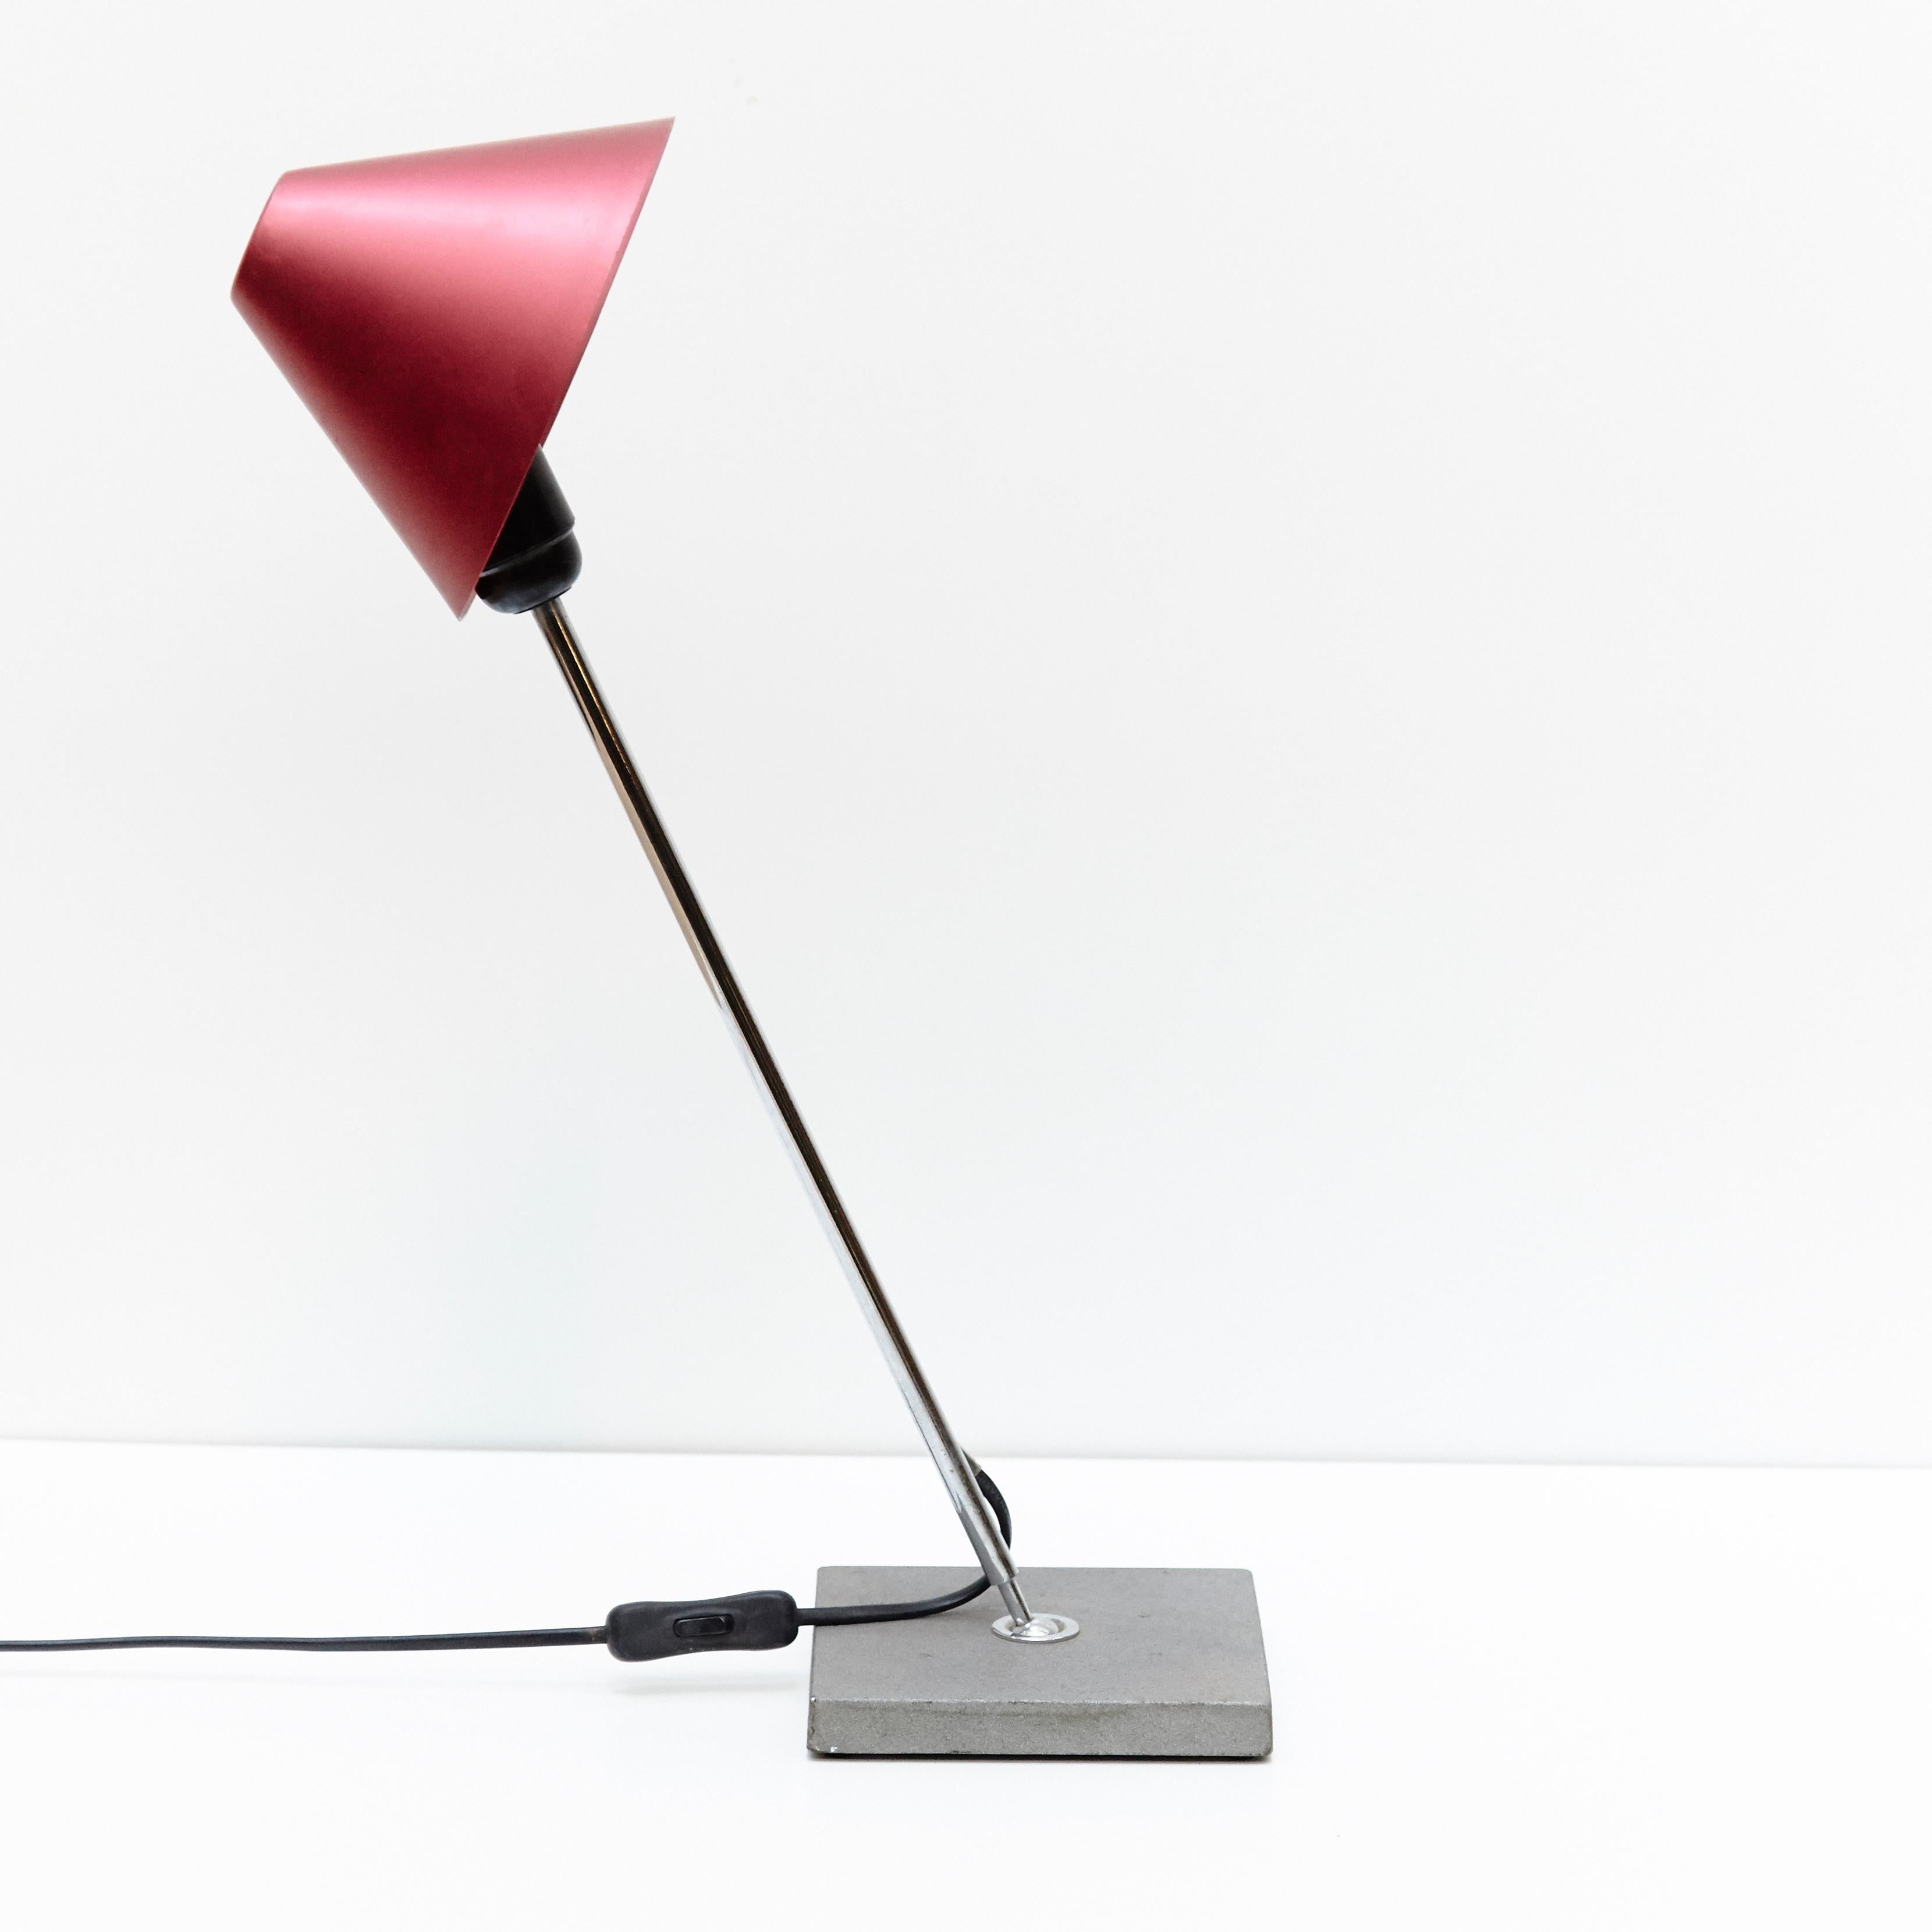 Spanish Lamp Designed by Mobles 114, Barcelona, 1978